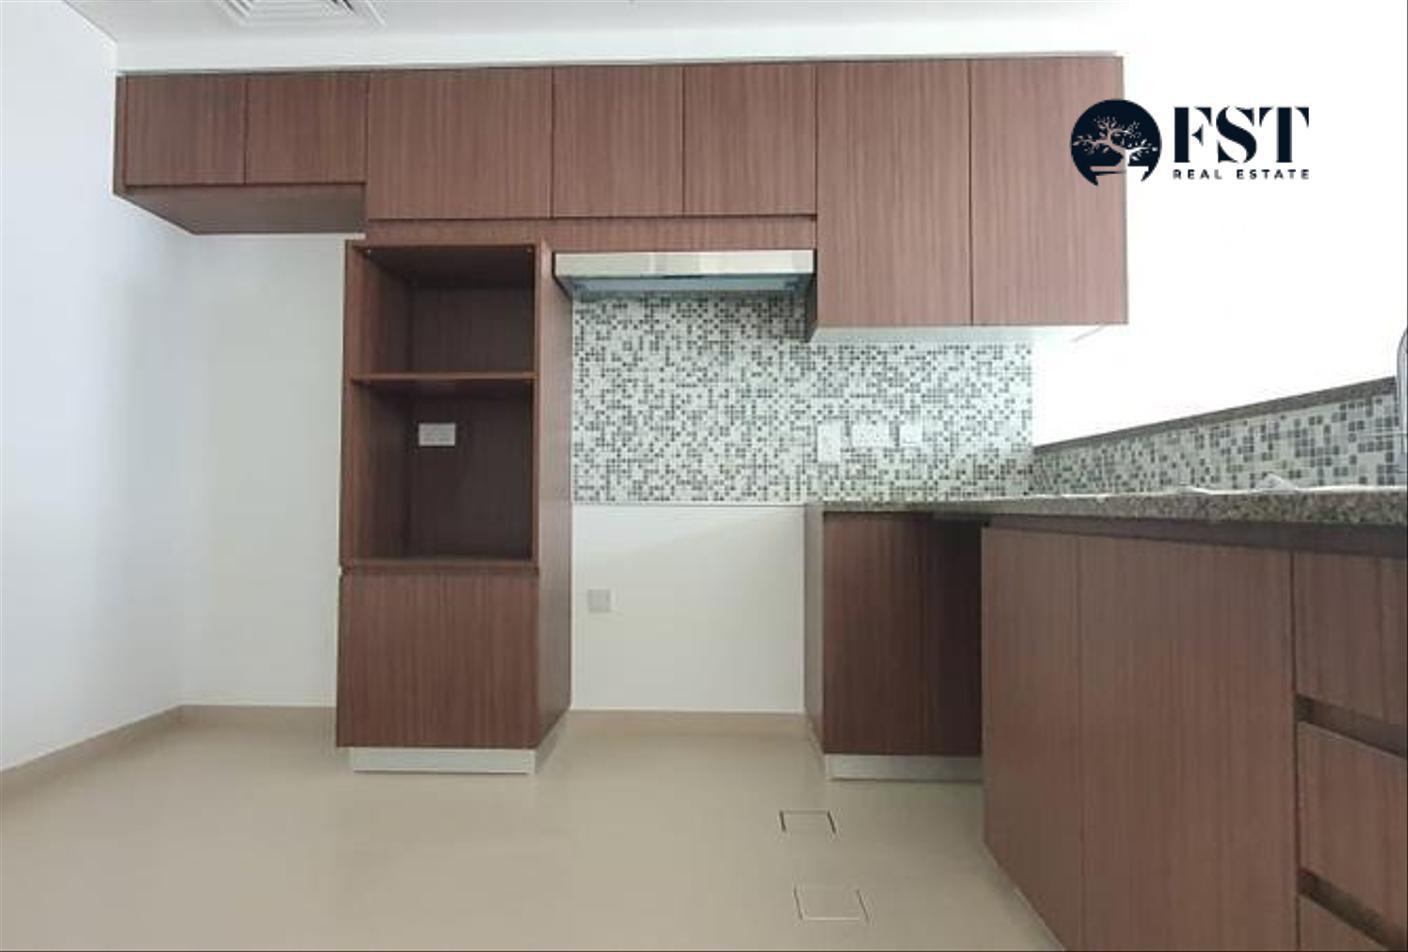 3 bed, 5 bath Townhouse for sale in Mudon Views, Mudon, Dubai for price AED 2300000 